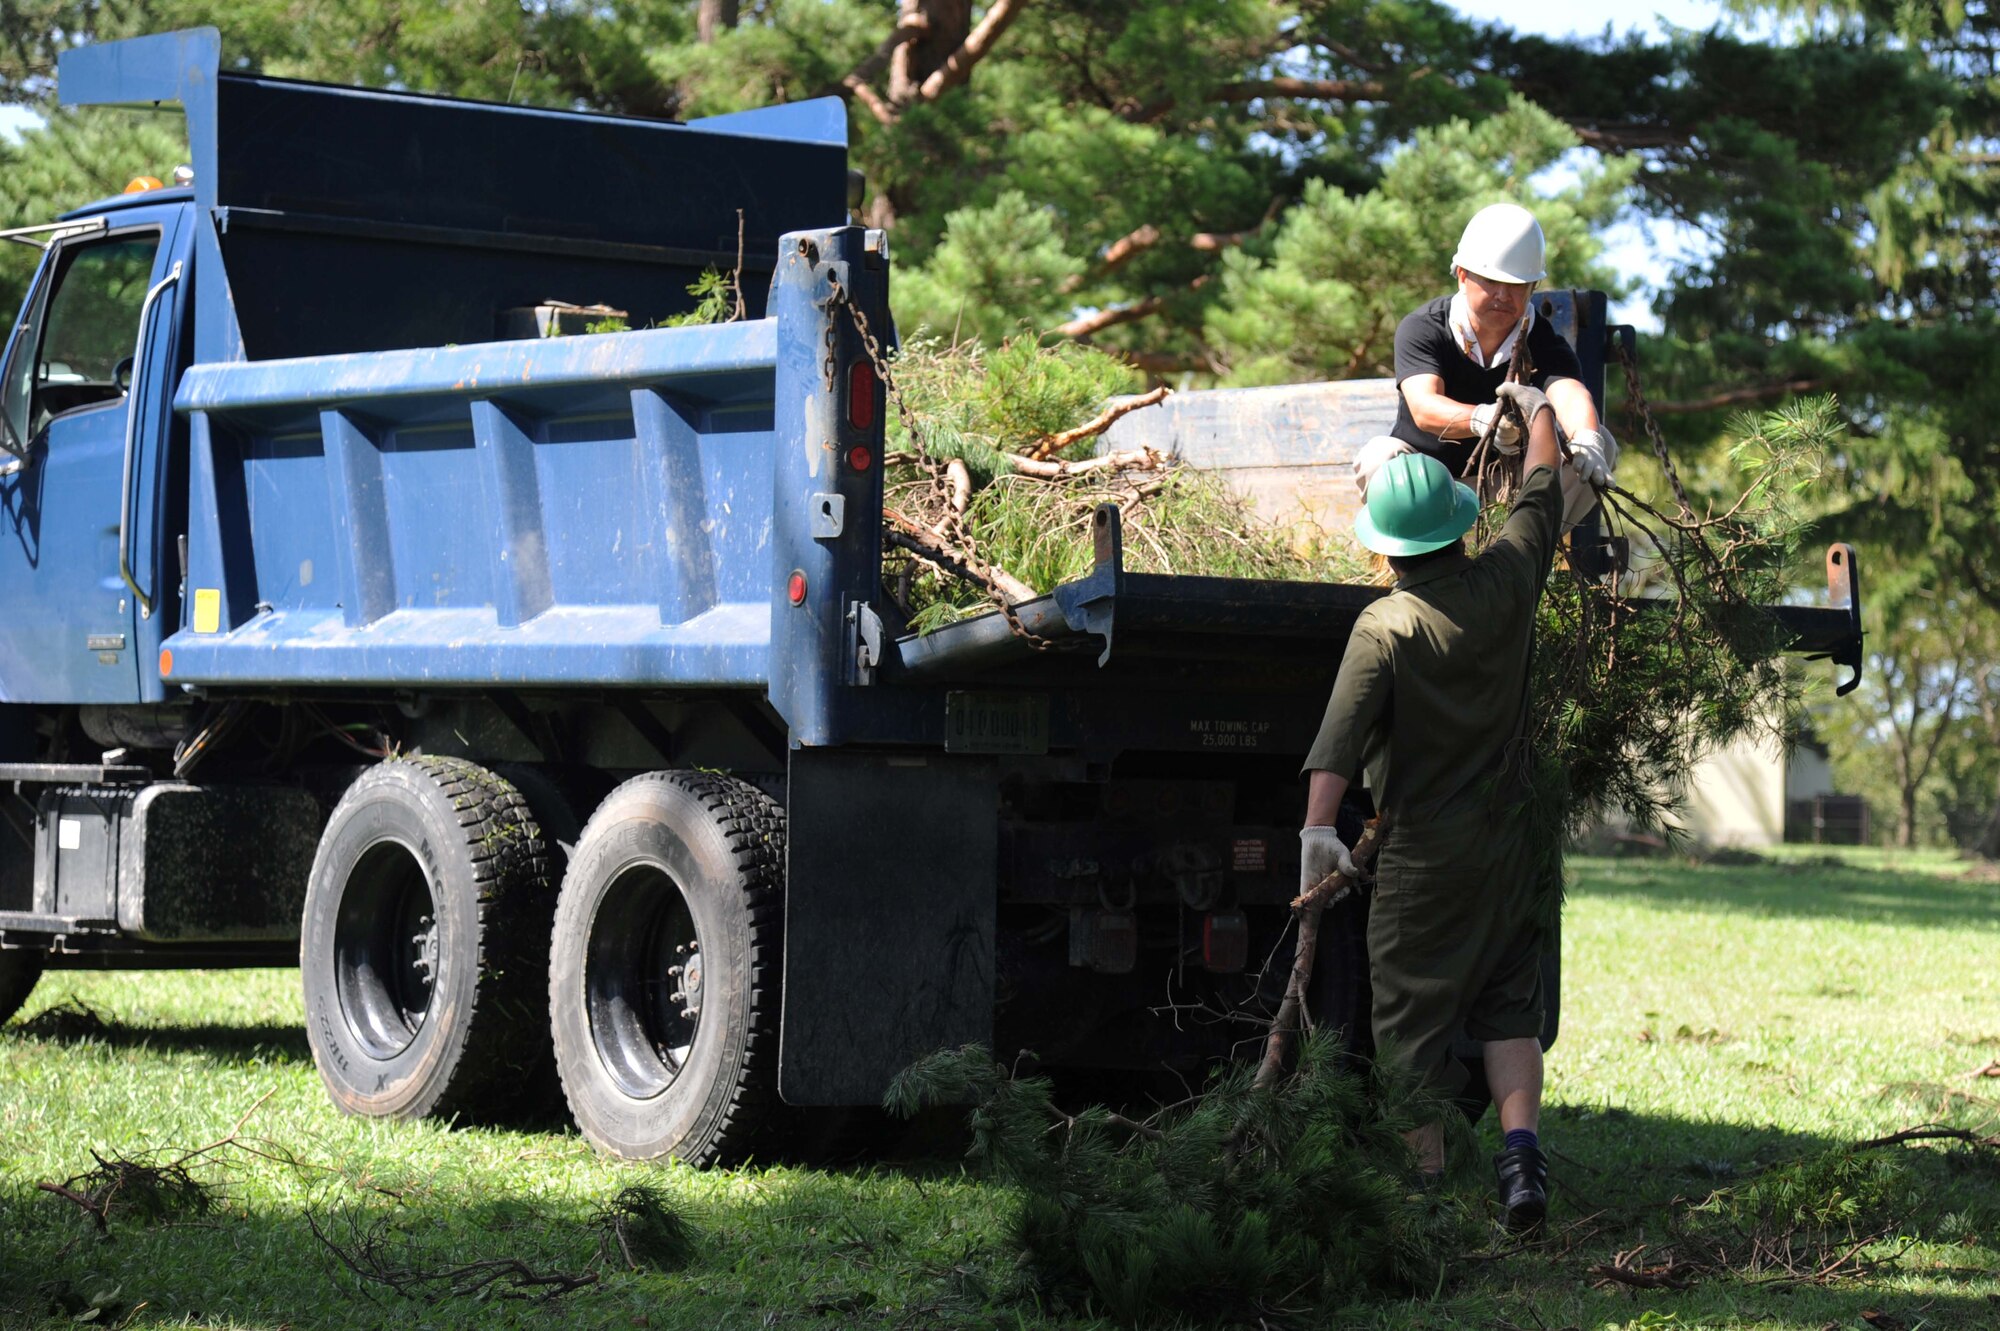 Members of the 35th Civil Engineer Squadron, operations section, clean up fallen debris at Misawa Air Base, Japan, Aug. 31, 2016.  The 35th CES responded the morning after the storm and began clean up around the base. (U.S. Air Force photo by Tech. Sgt. April Quintanilla)